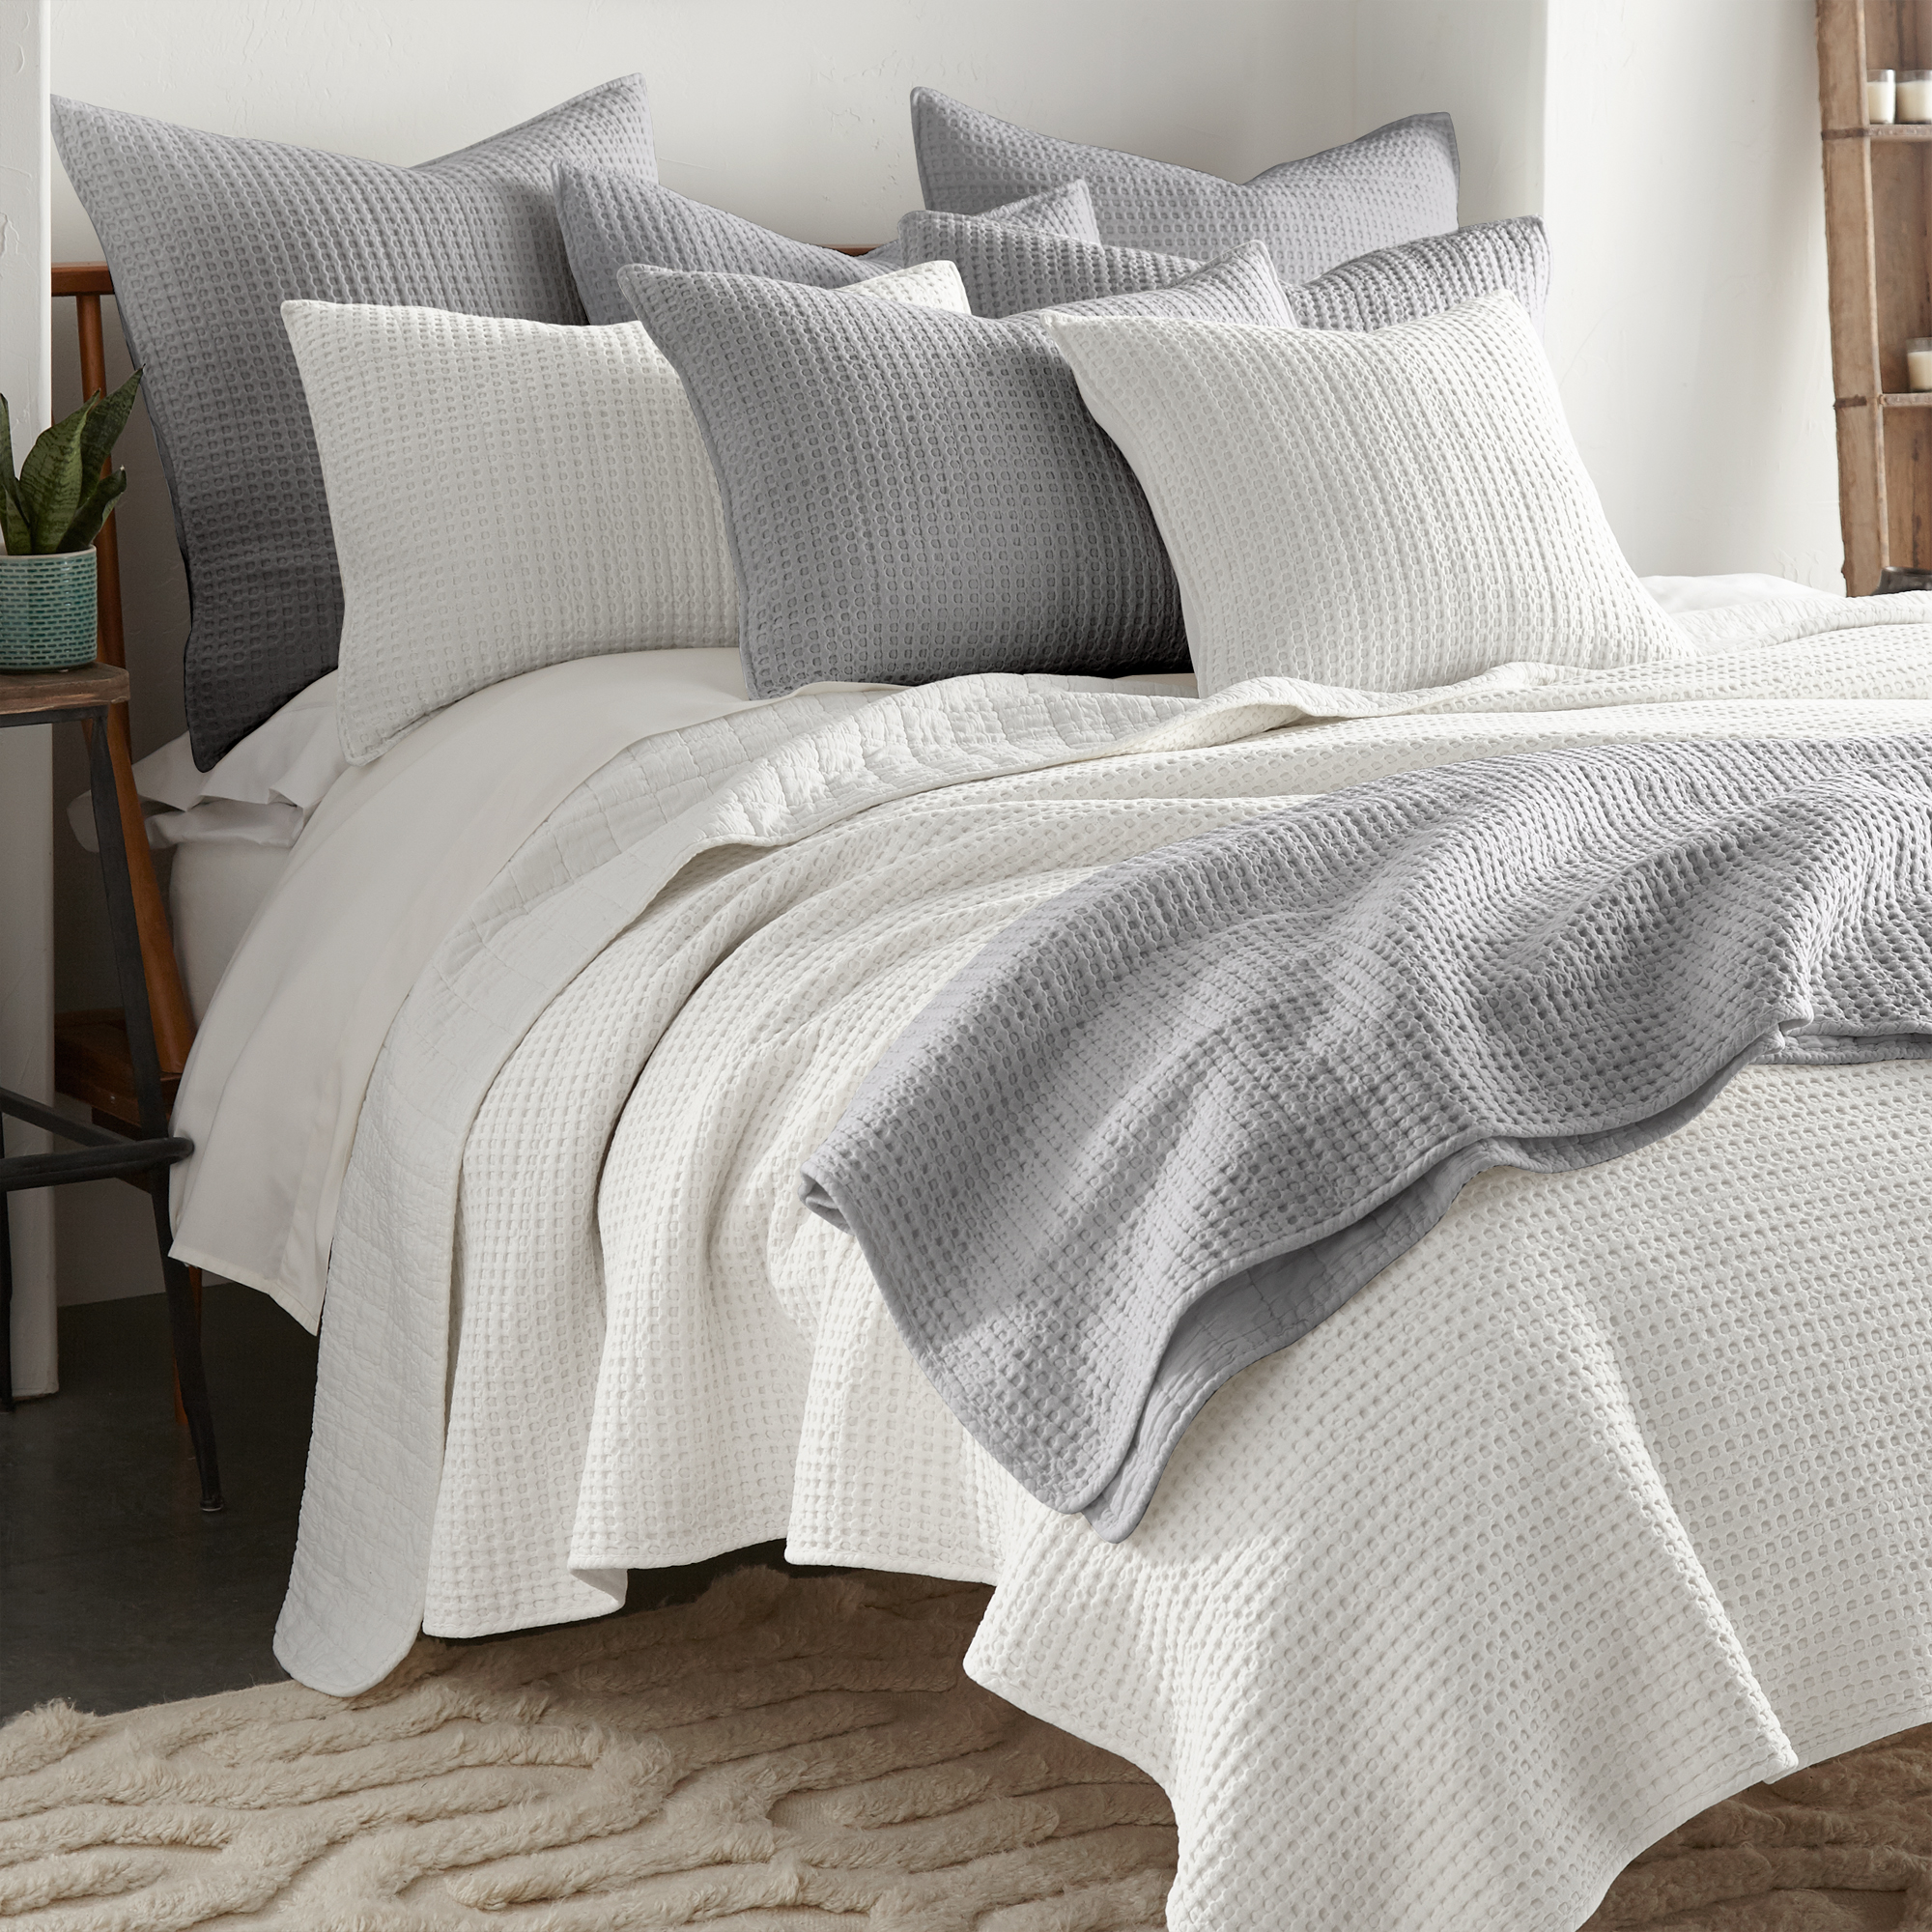 Levtex Home - Mills Waffle - King/Cal King Quilt Set - Cream Cotton Waffle - Quilt Size (106 x 92in.), Sham Size (36 x 20in.) - image 4 of 7